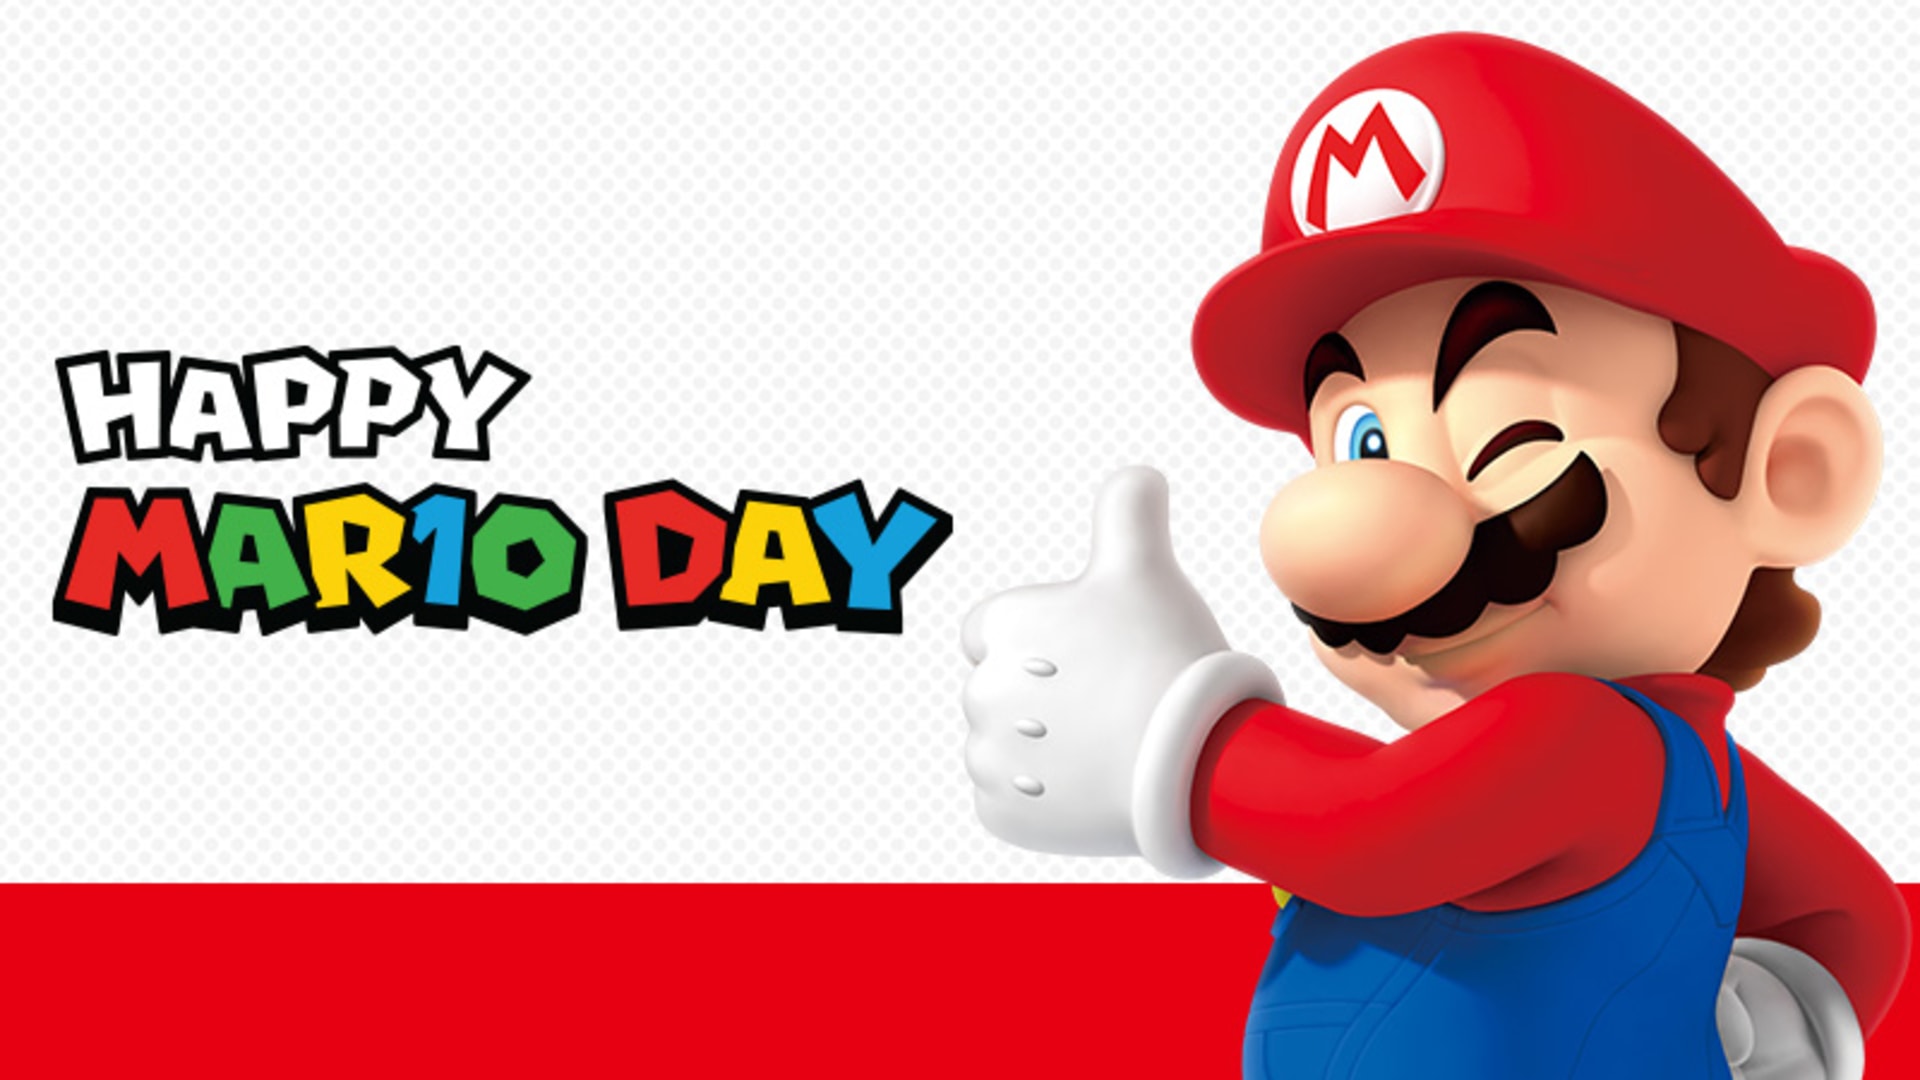 Happy MAR10 Day Have fun with this stache of Mario games - Nintendo